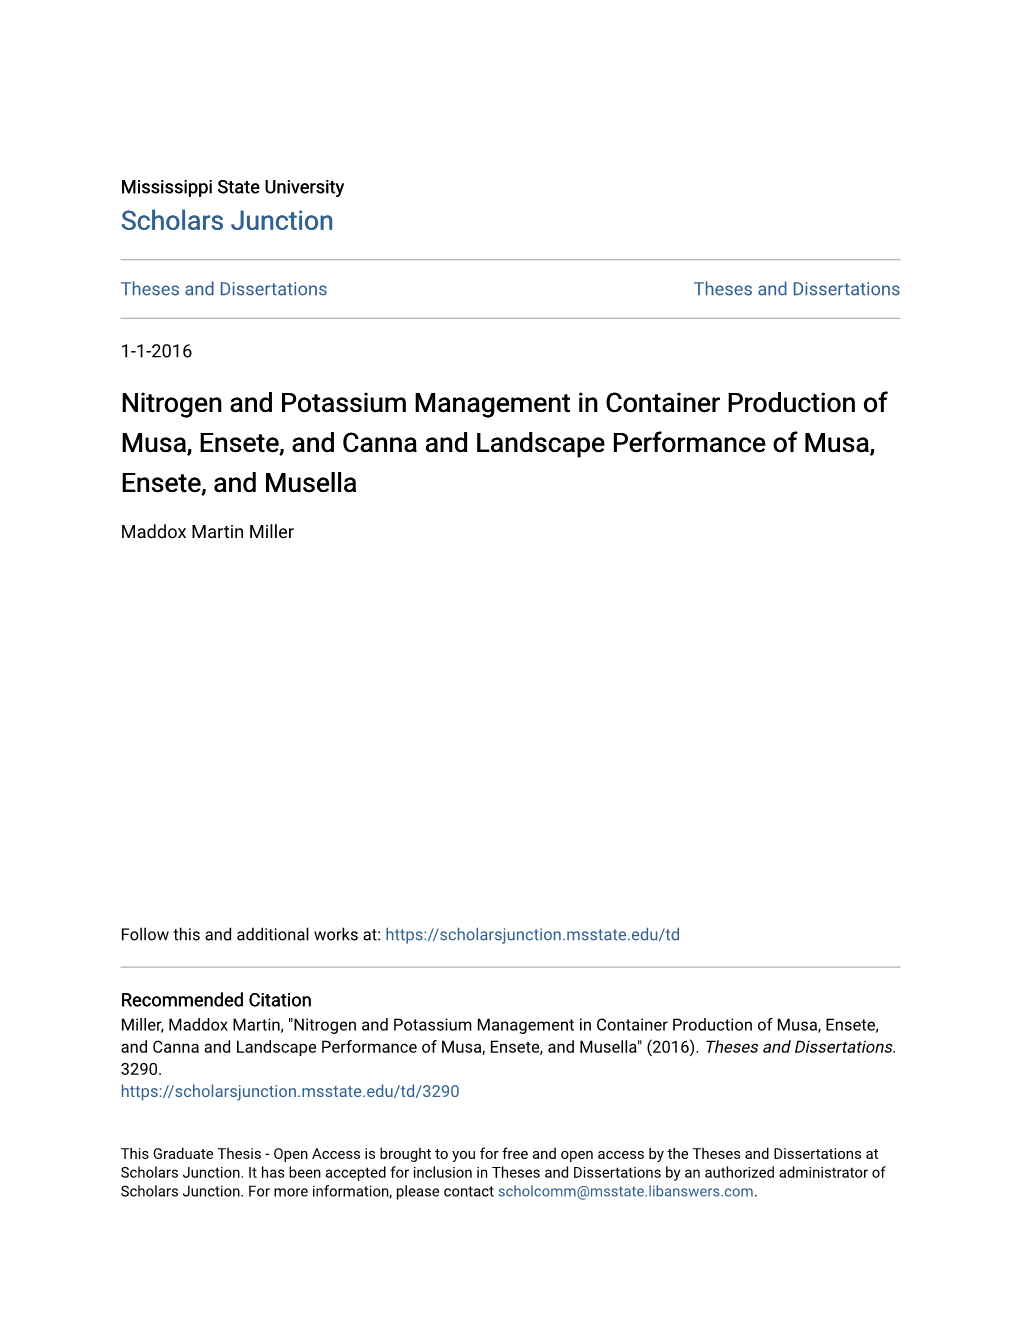 Nitrogen and Potassium Management in Container Production of Musa, Ensete, and Canna and Landscape Performance of Musa, Ensete, and Musella